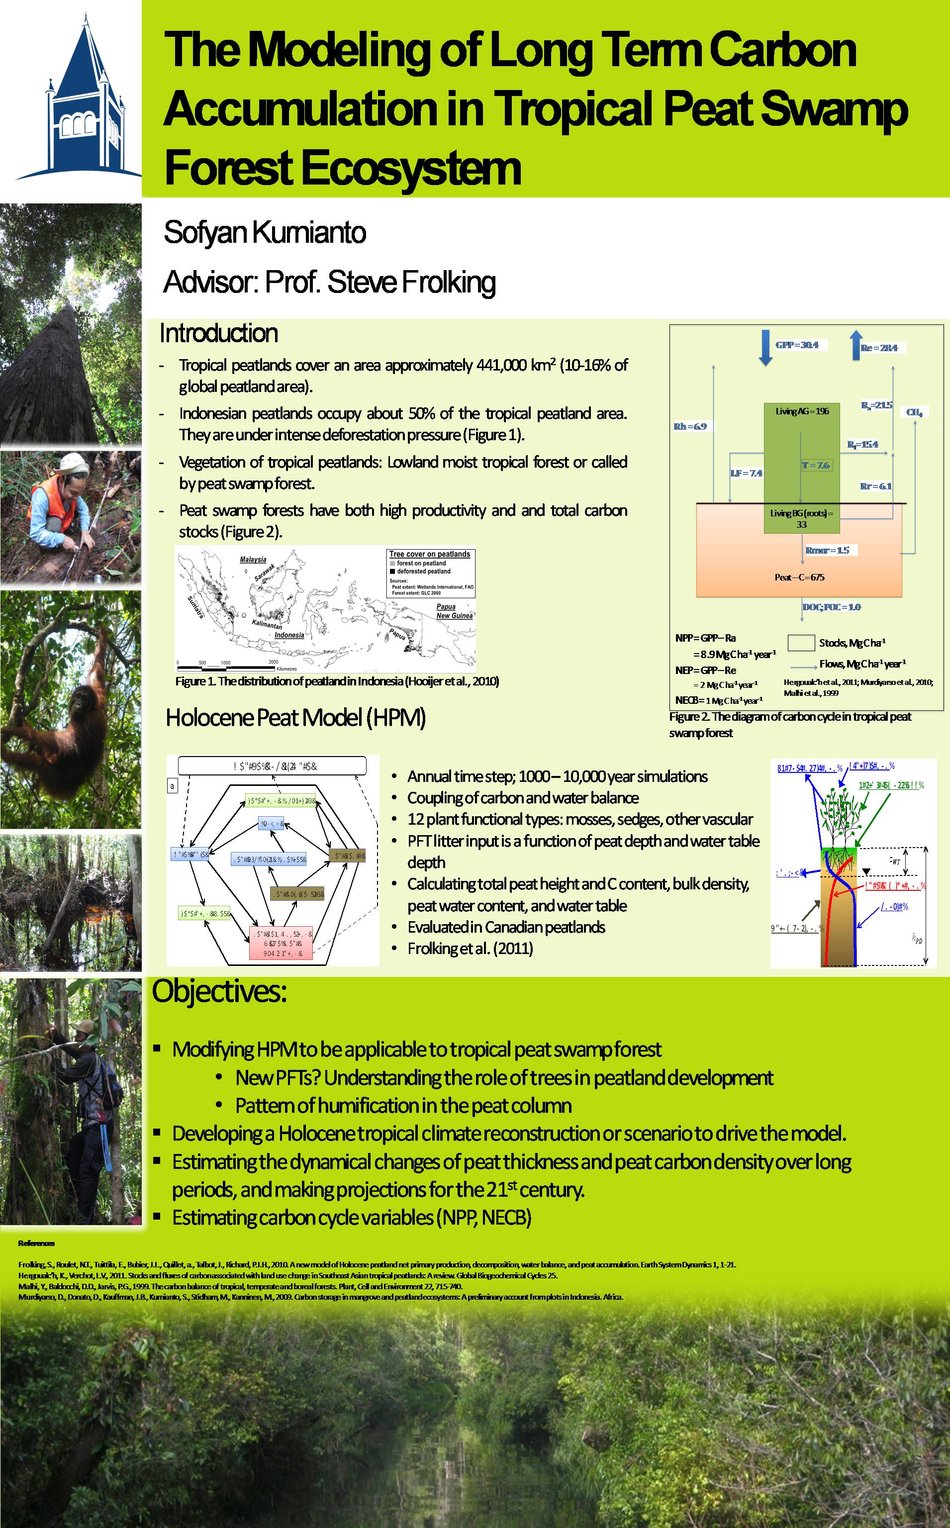 The Modeling Of Long Term Carbon Accumulation In Tropical Peat Swamp Forest Ecosystem   by skurnianto